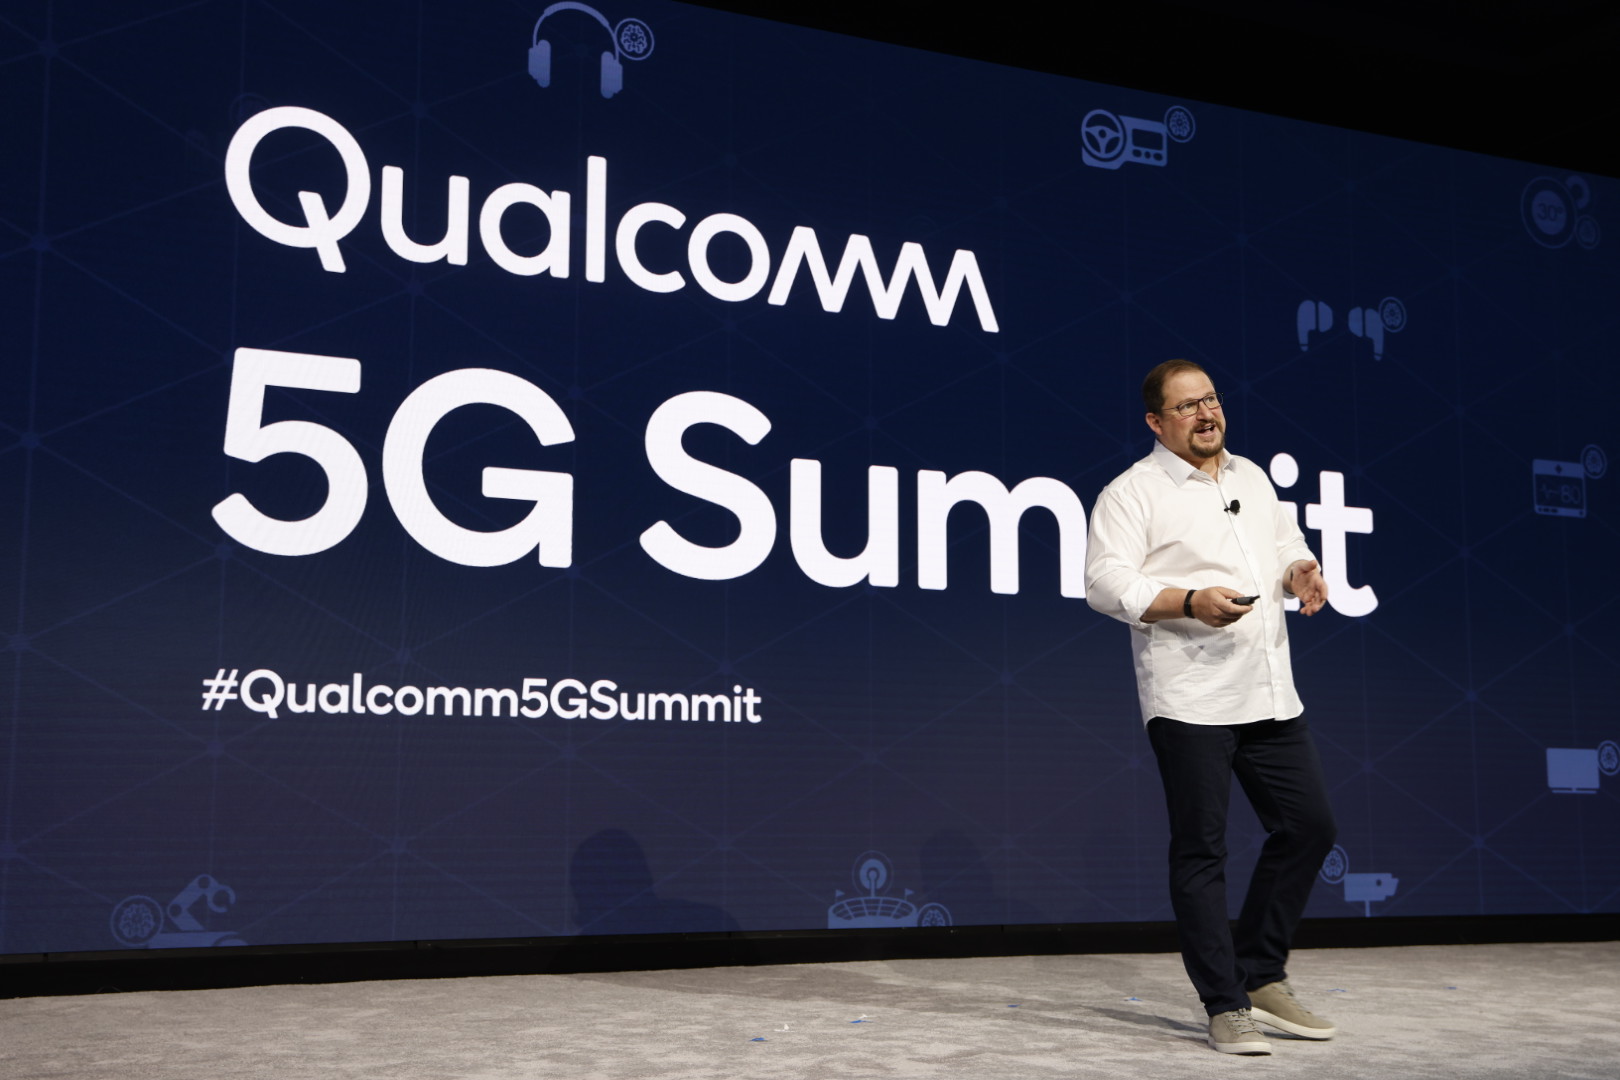 How Qualcomm Views Opportunity at the Edge